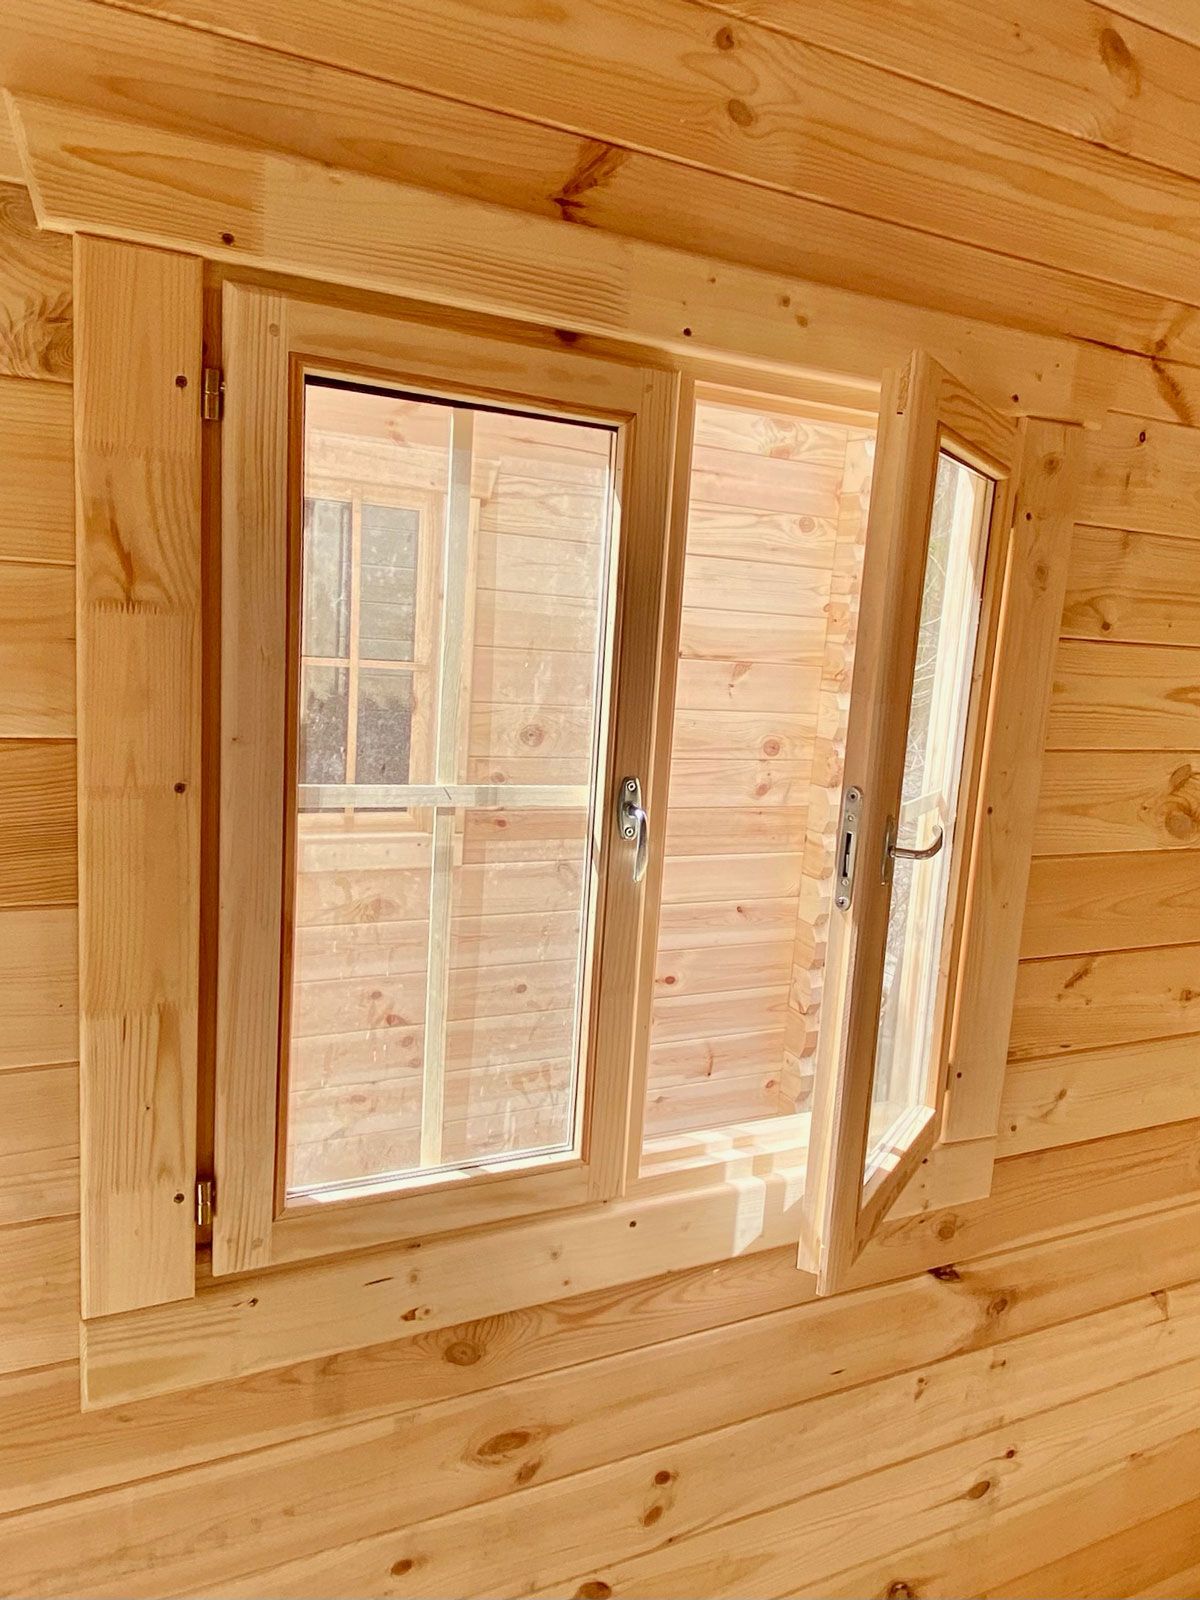 small wood cabin with glass window opening inward